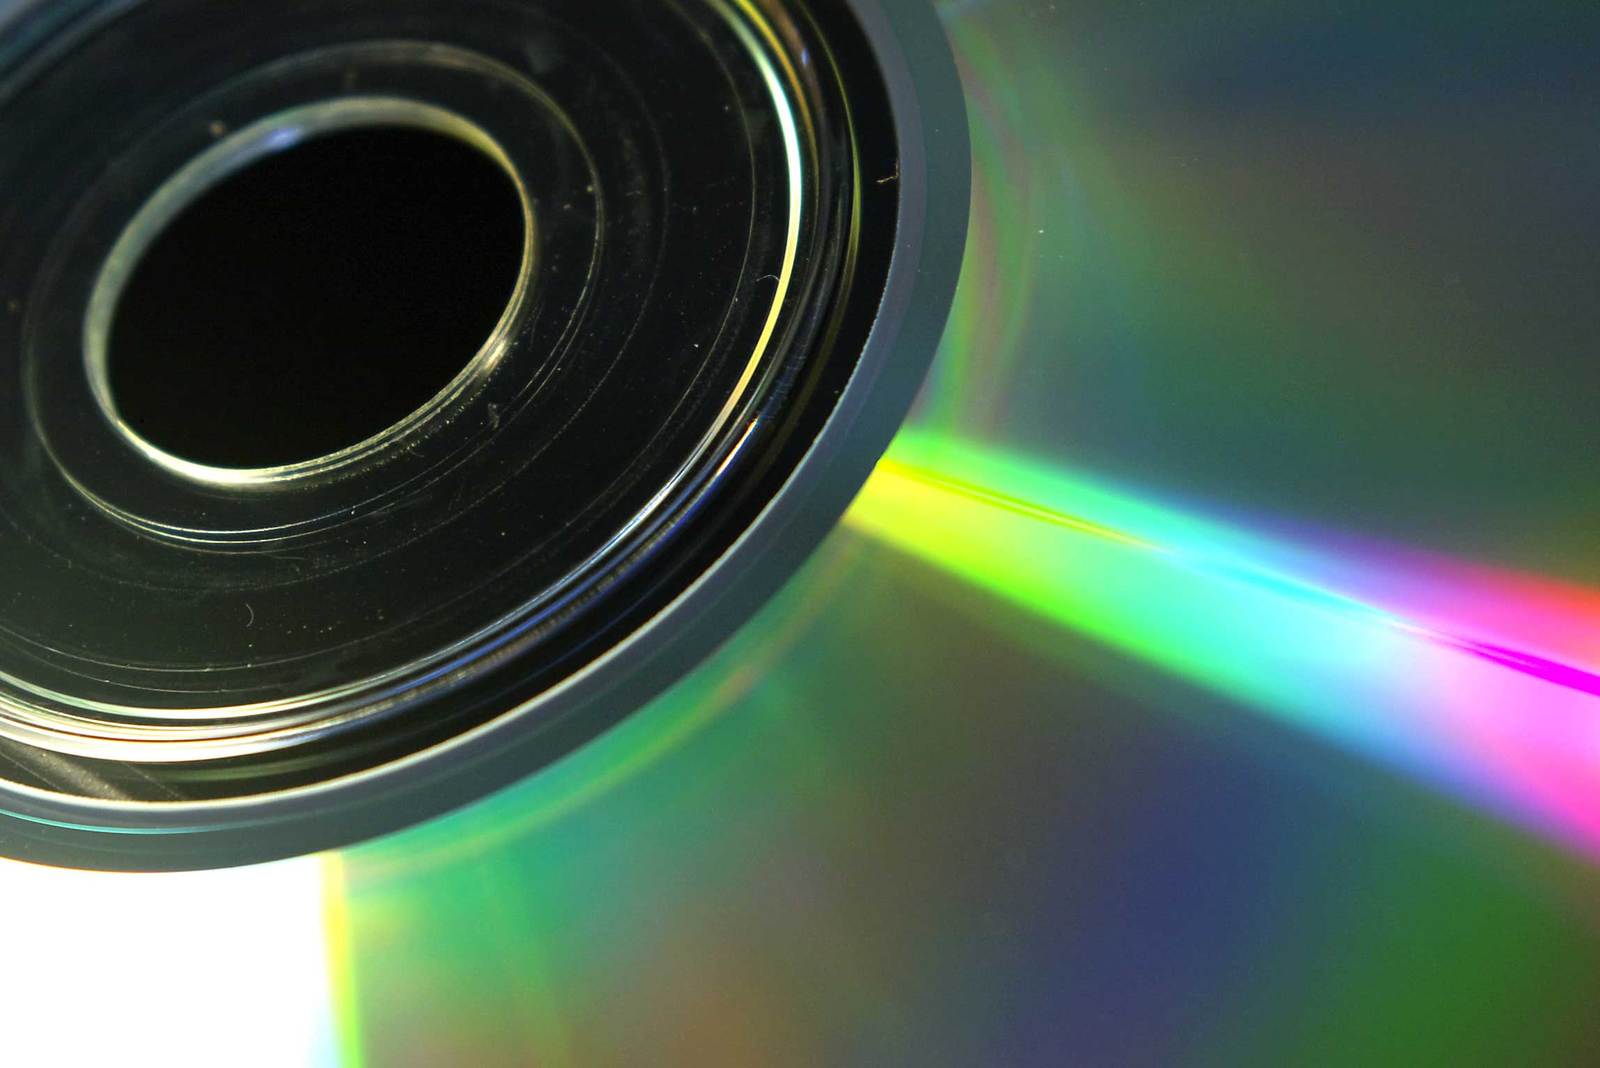 a compact disc that is very close up